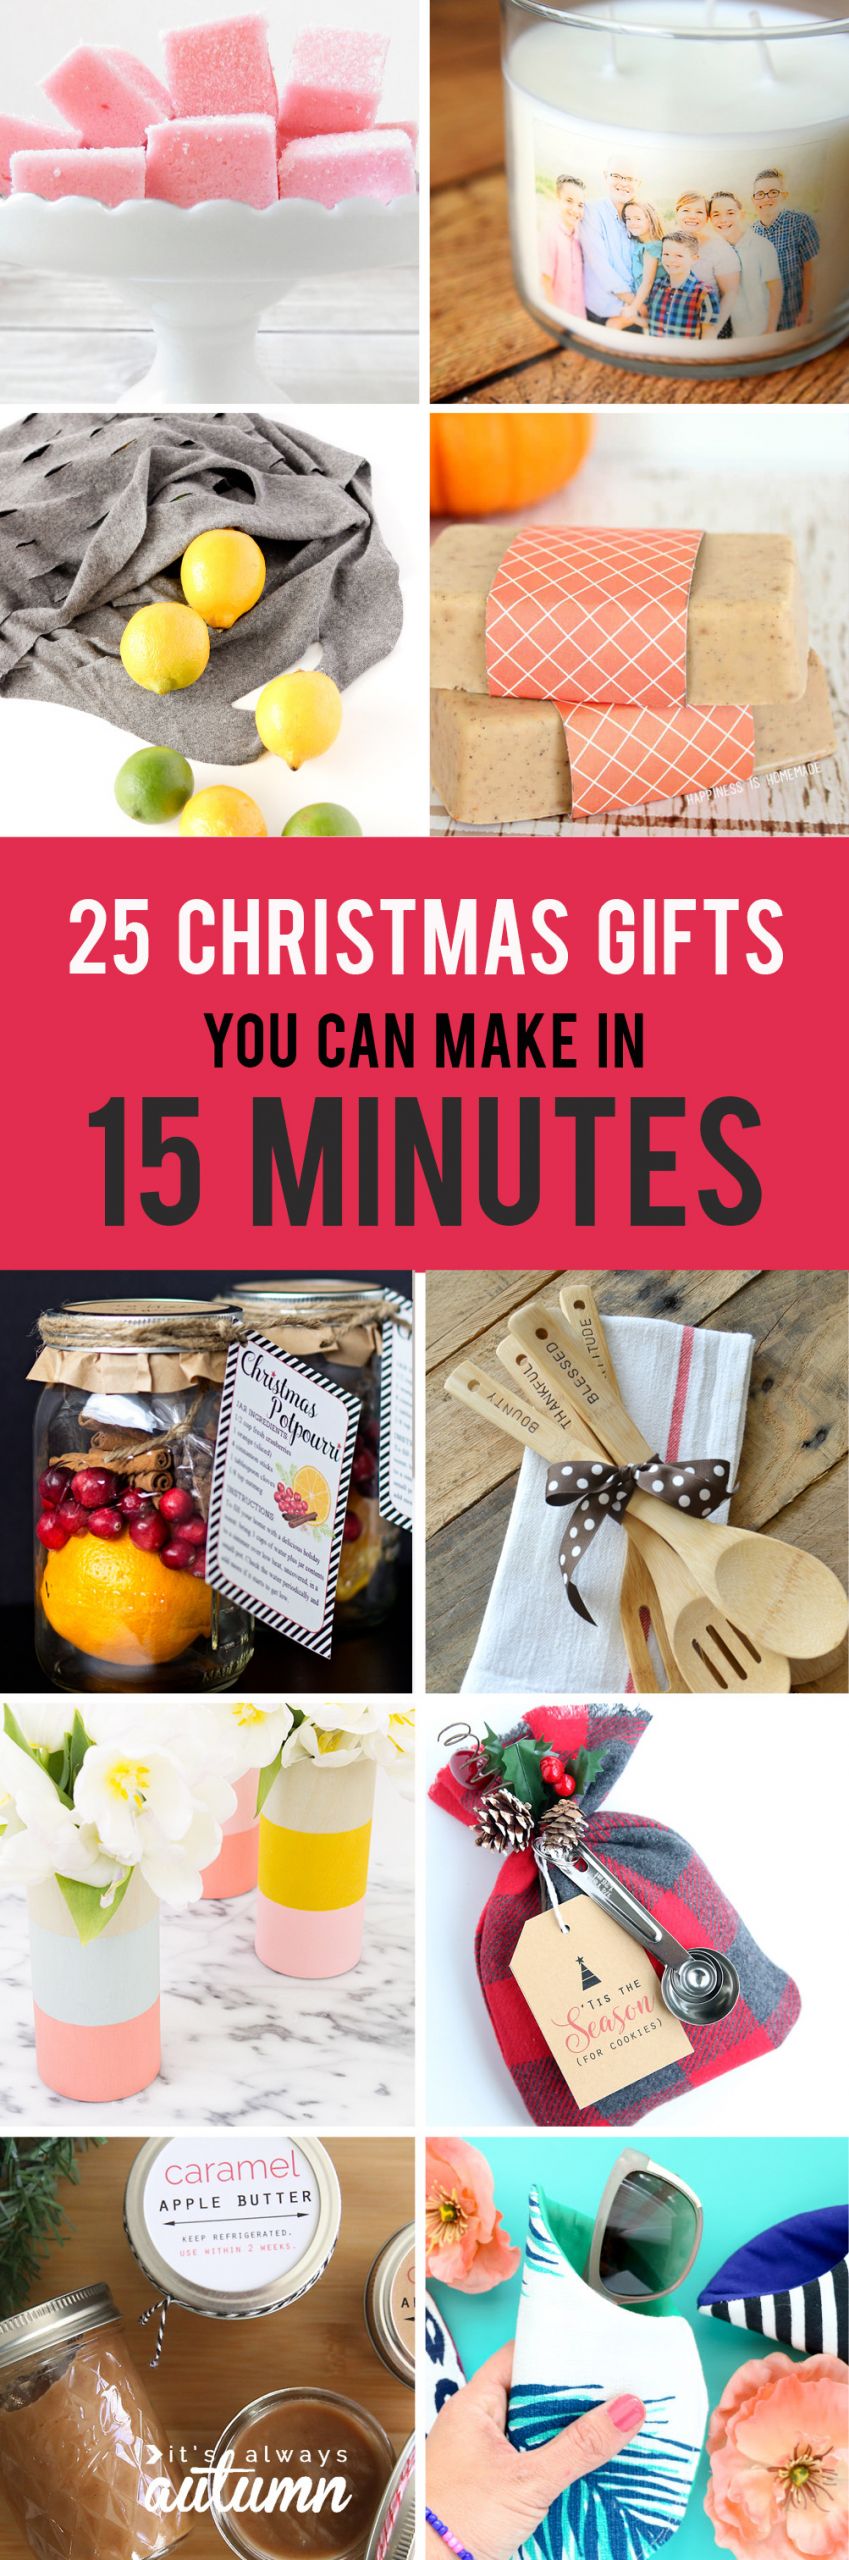 Easy DIY Gift Ideas
 25 easy homemade Christmas ts you can make in 15